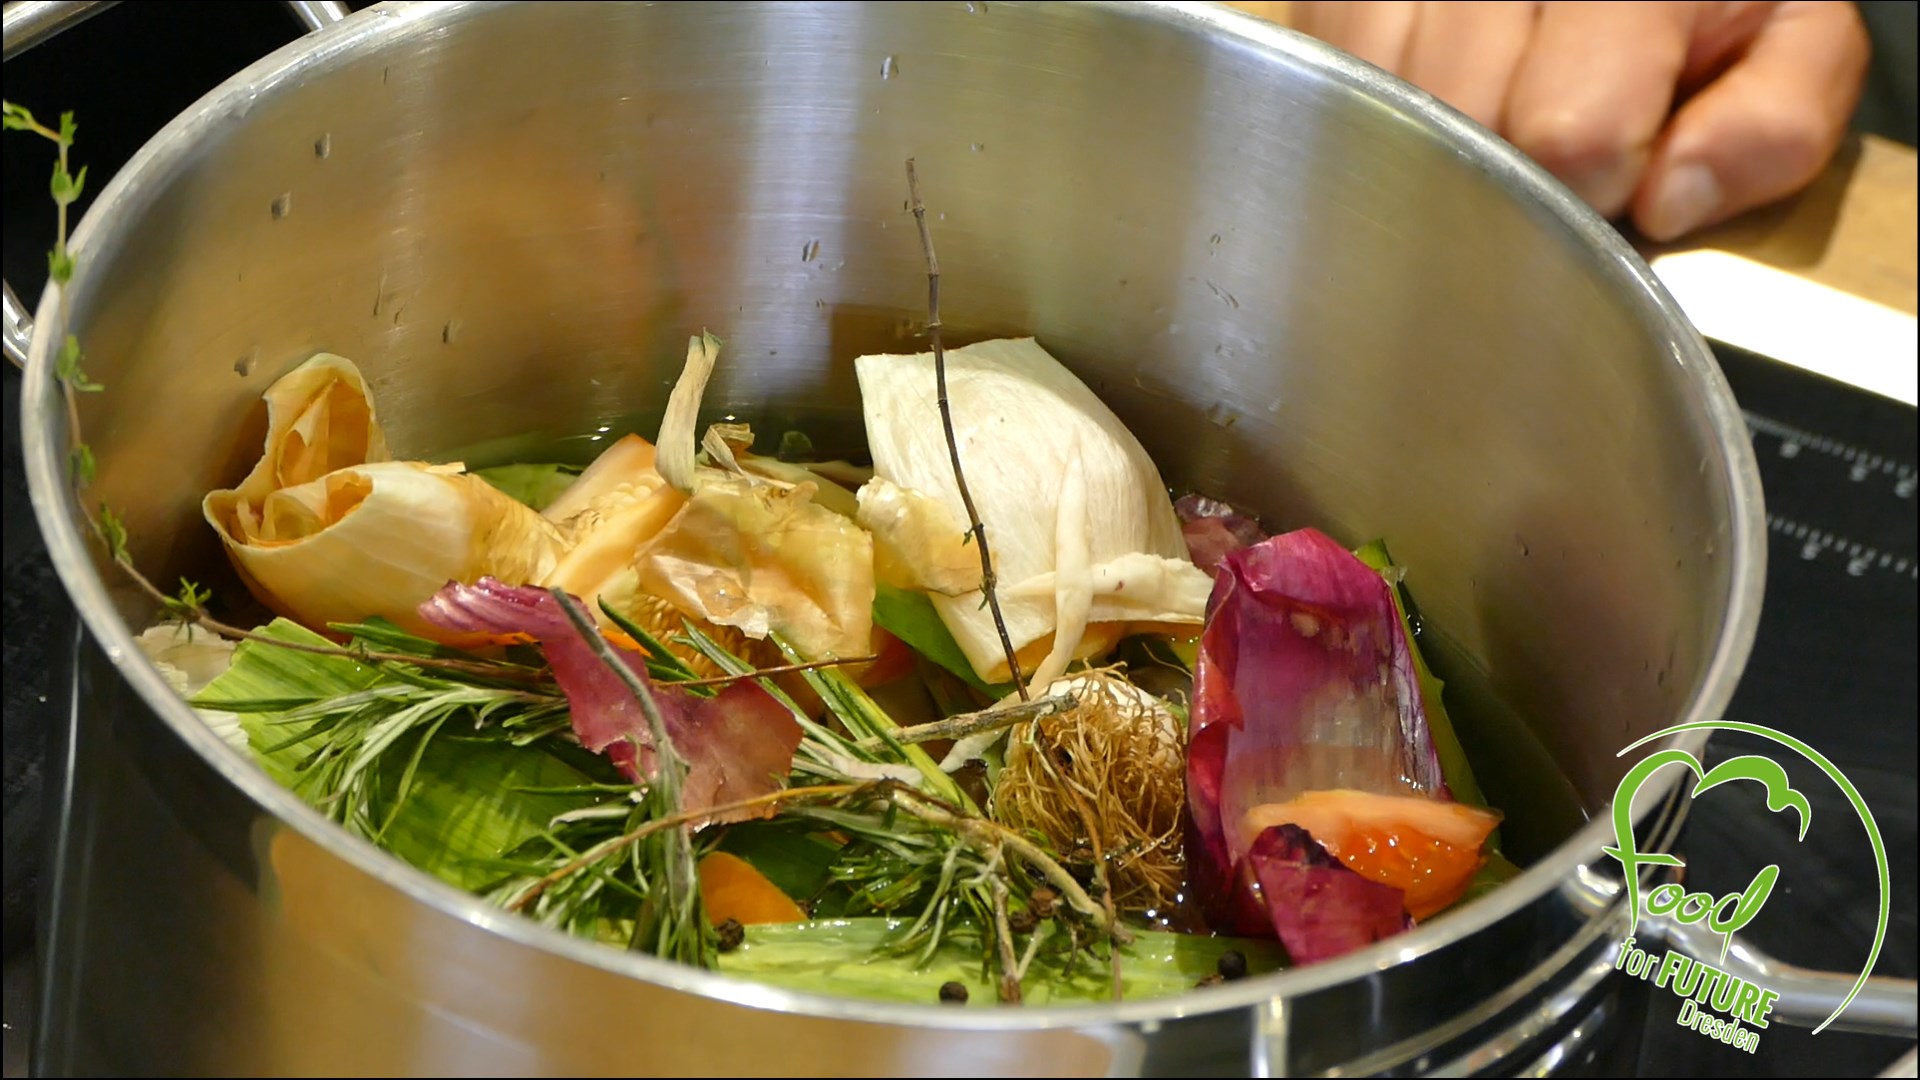 Leftover vegetables lie with herbs in a silver-coloured pot standing on a cooker. On the bottom right is the Food for Future logo.